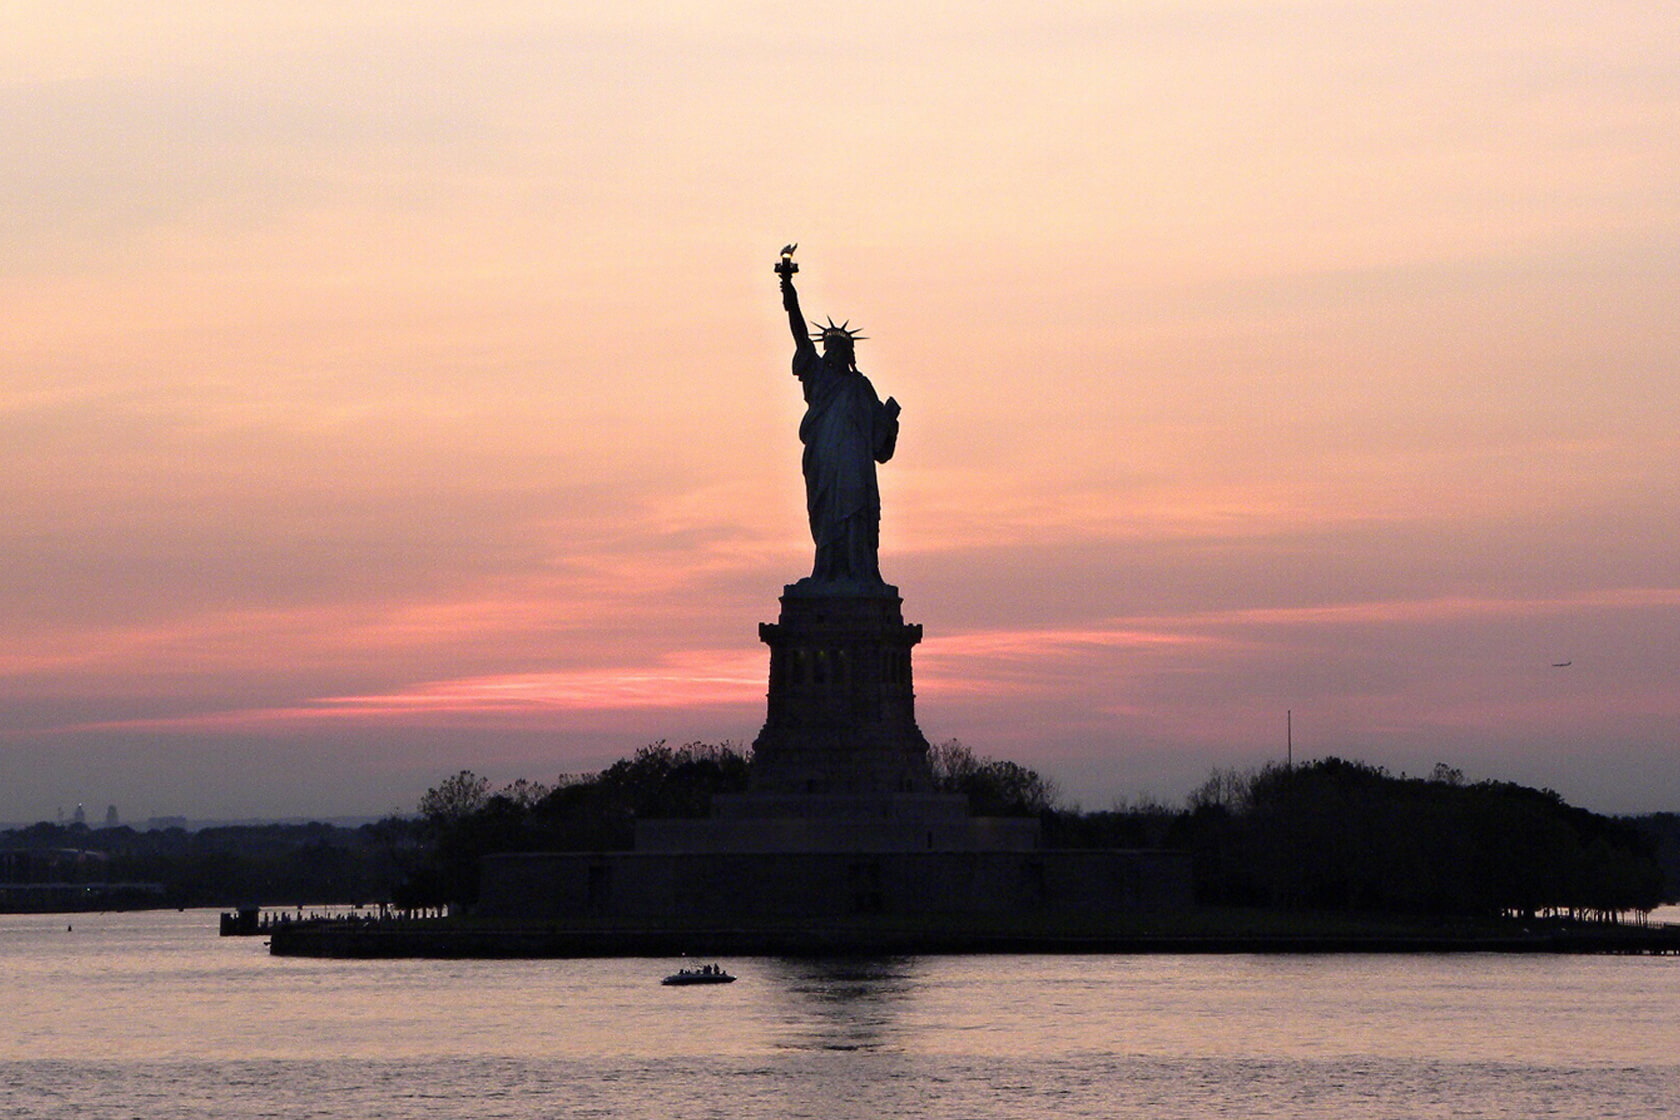 Image of the Statue of Liberty.